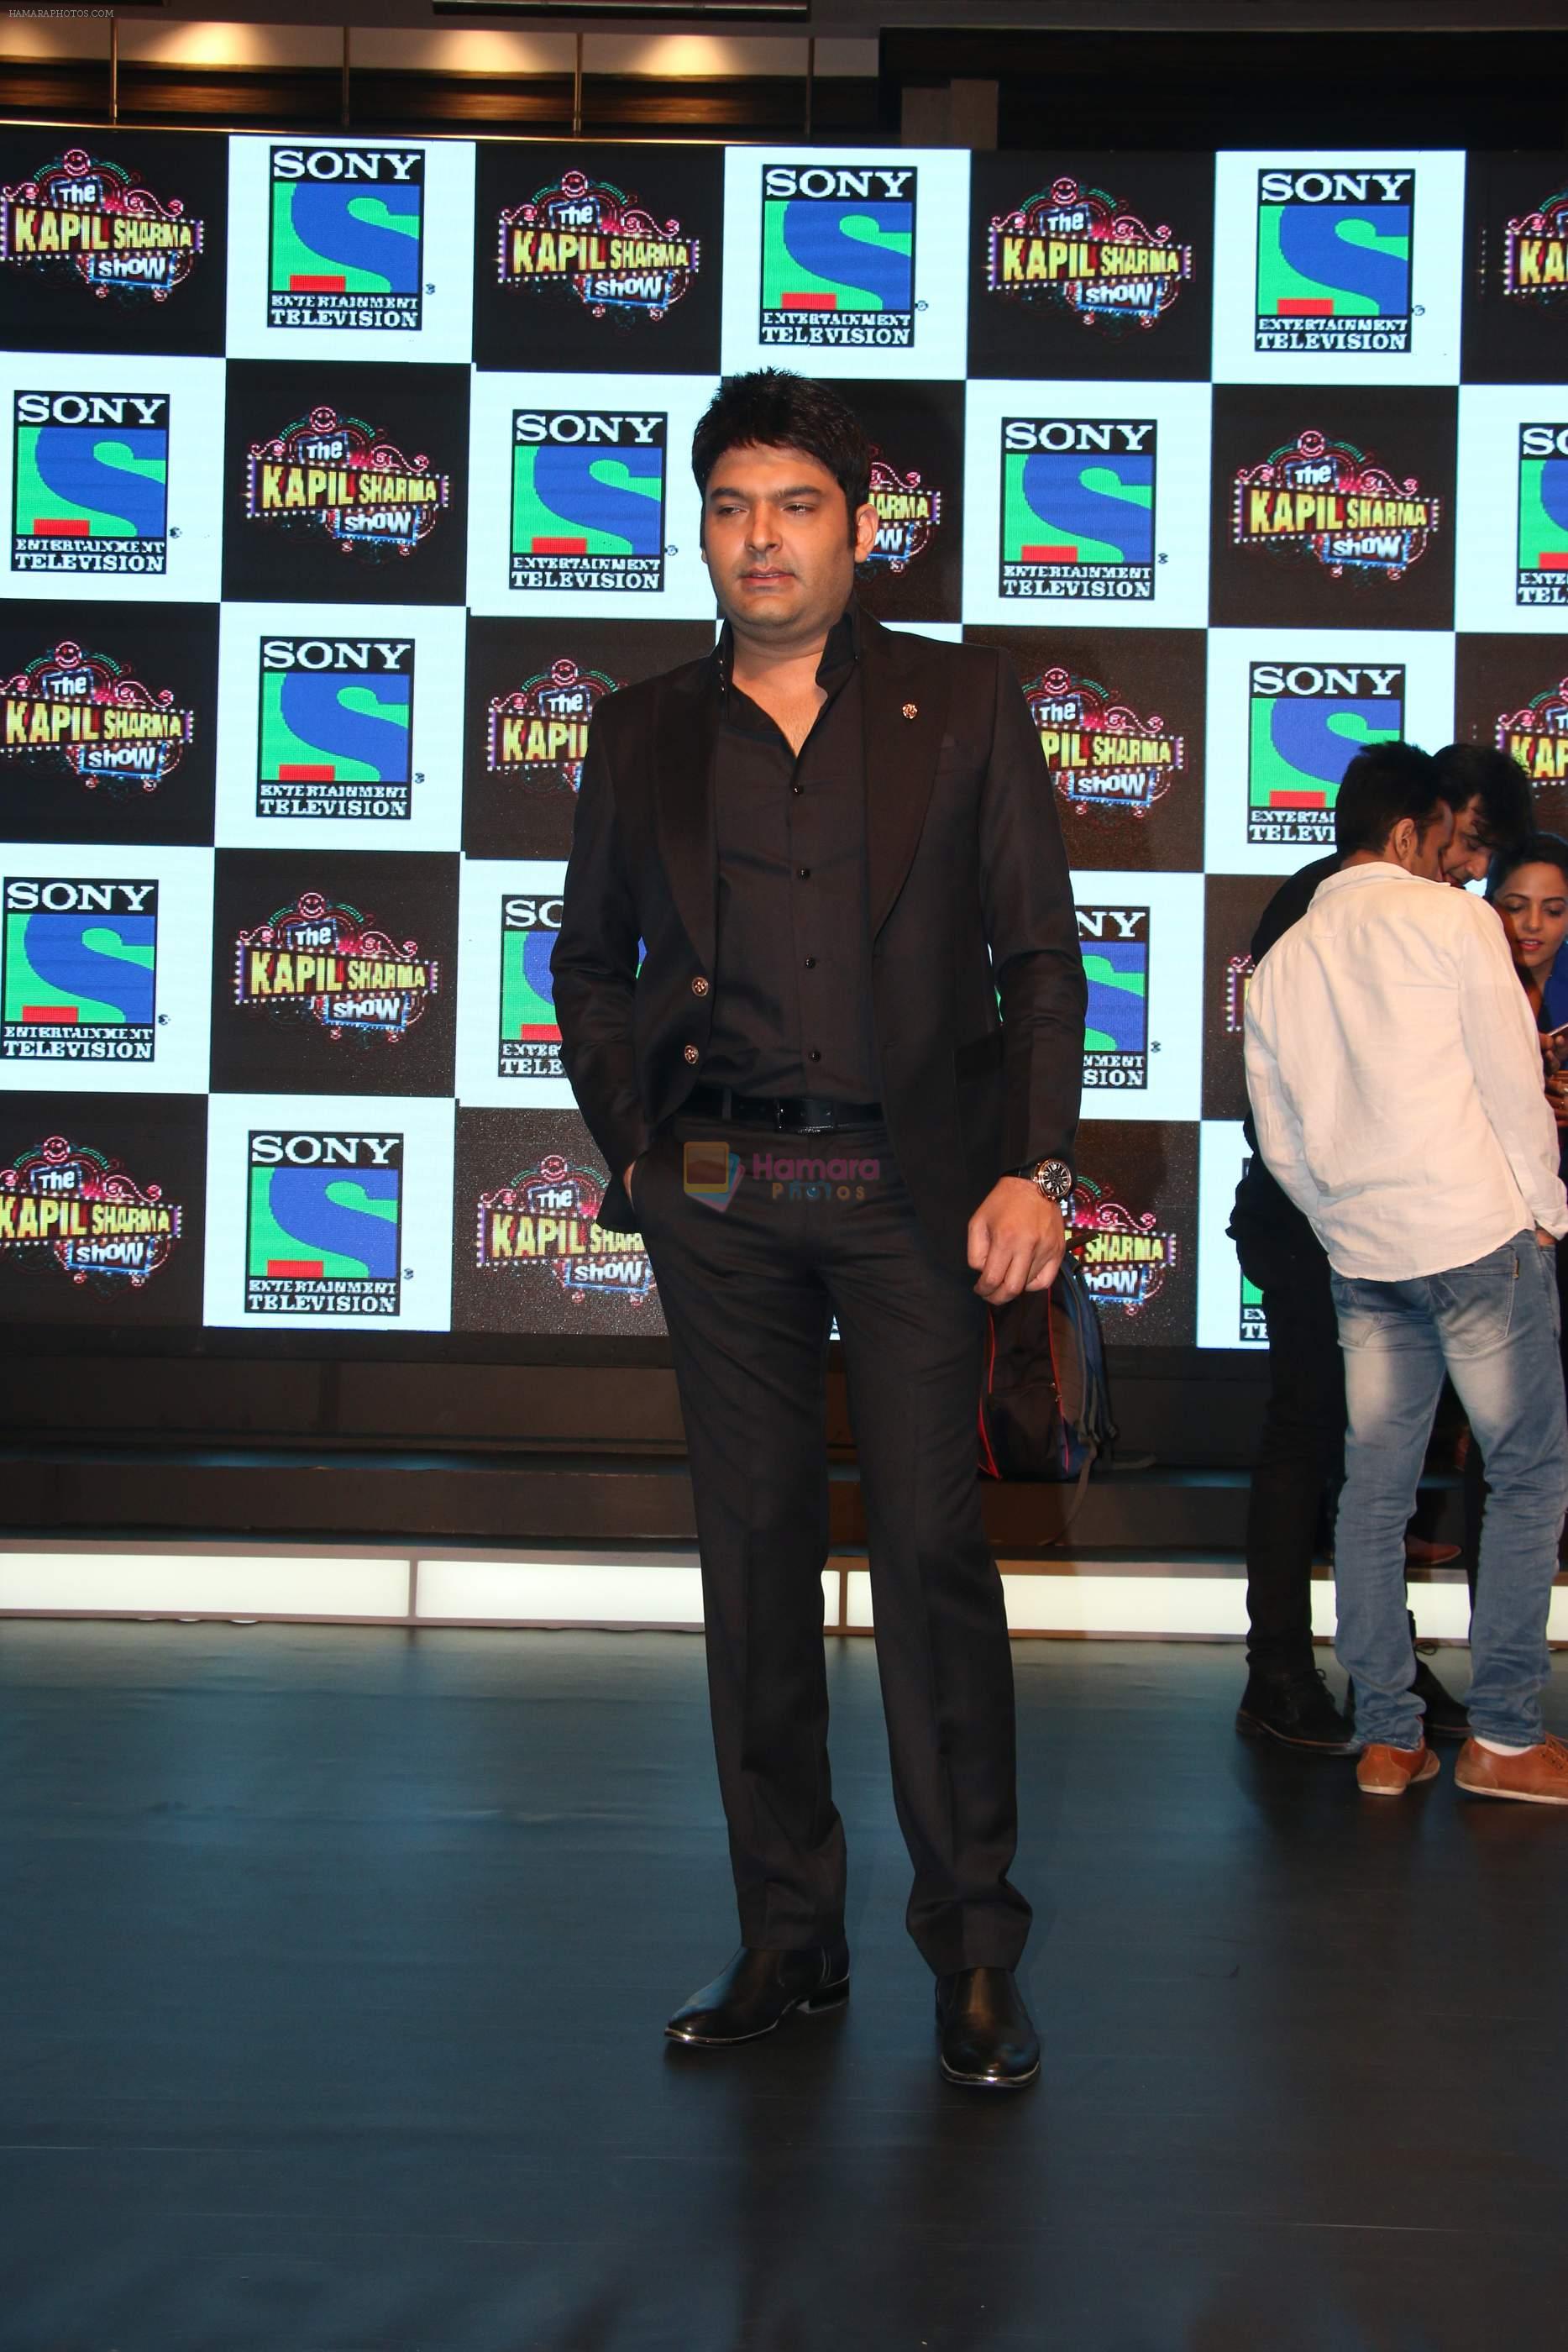 Kapil Sharma ties up with Sony with new Show The kapil Sharma Show on 1st March 2016